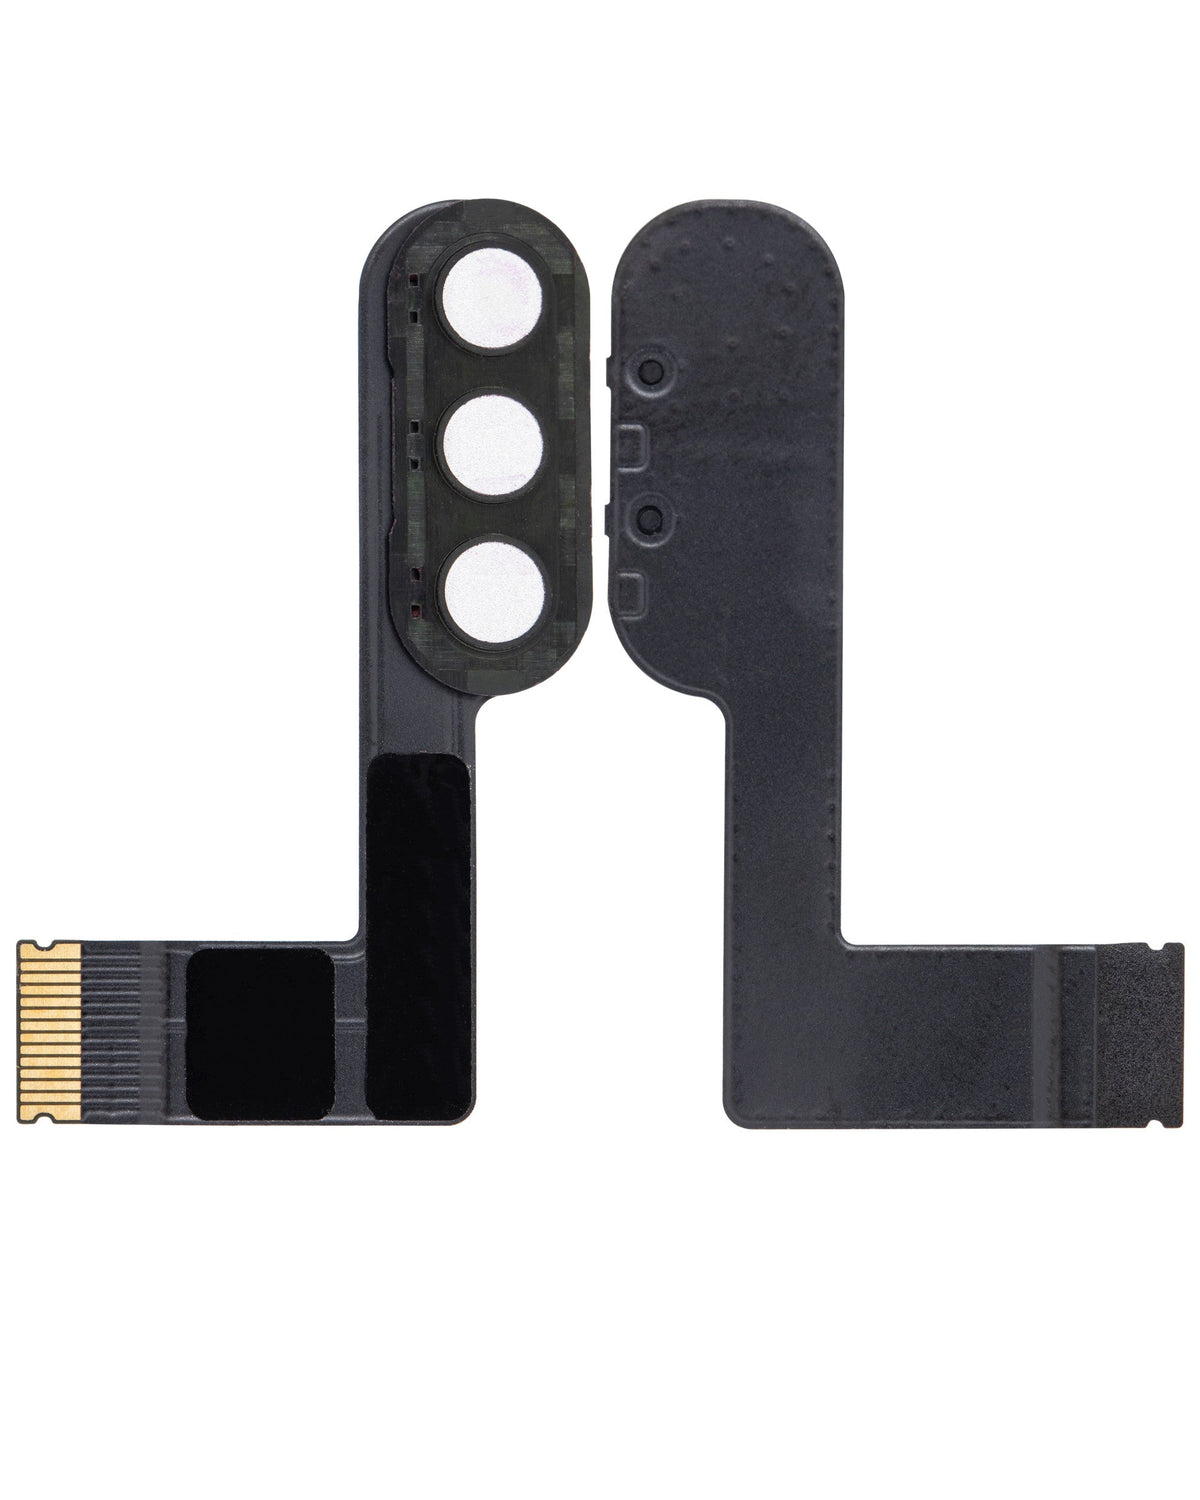 KEYBOARD FLEX CABLE COMPATIBLE FOR IPAD AIR 4/5 - SPACE GRAY